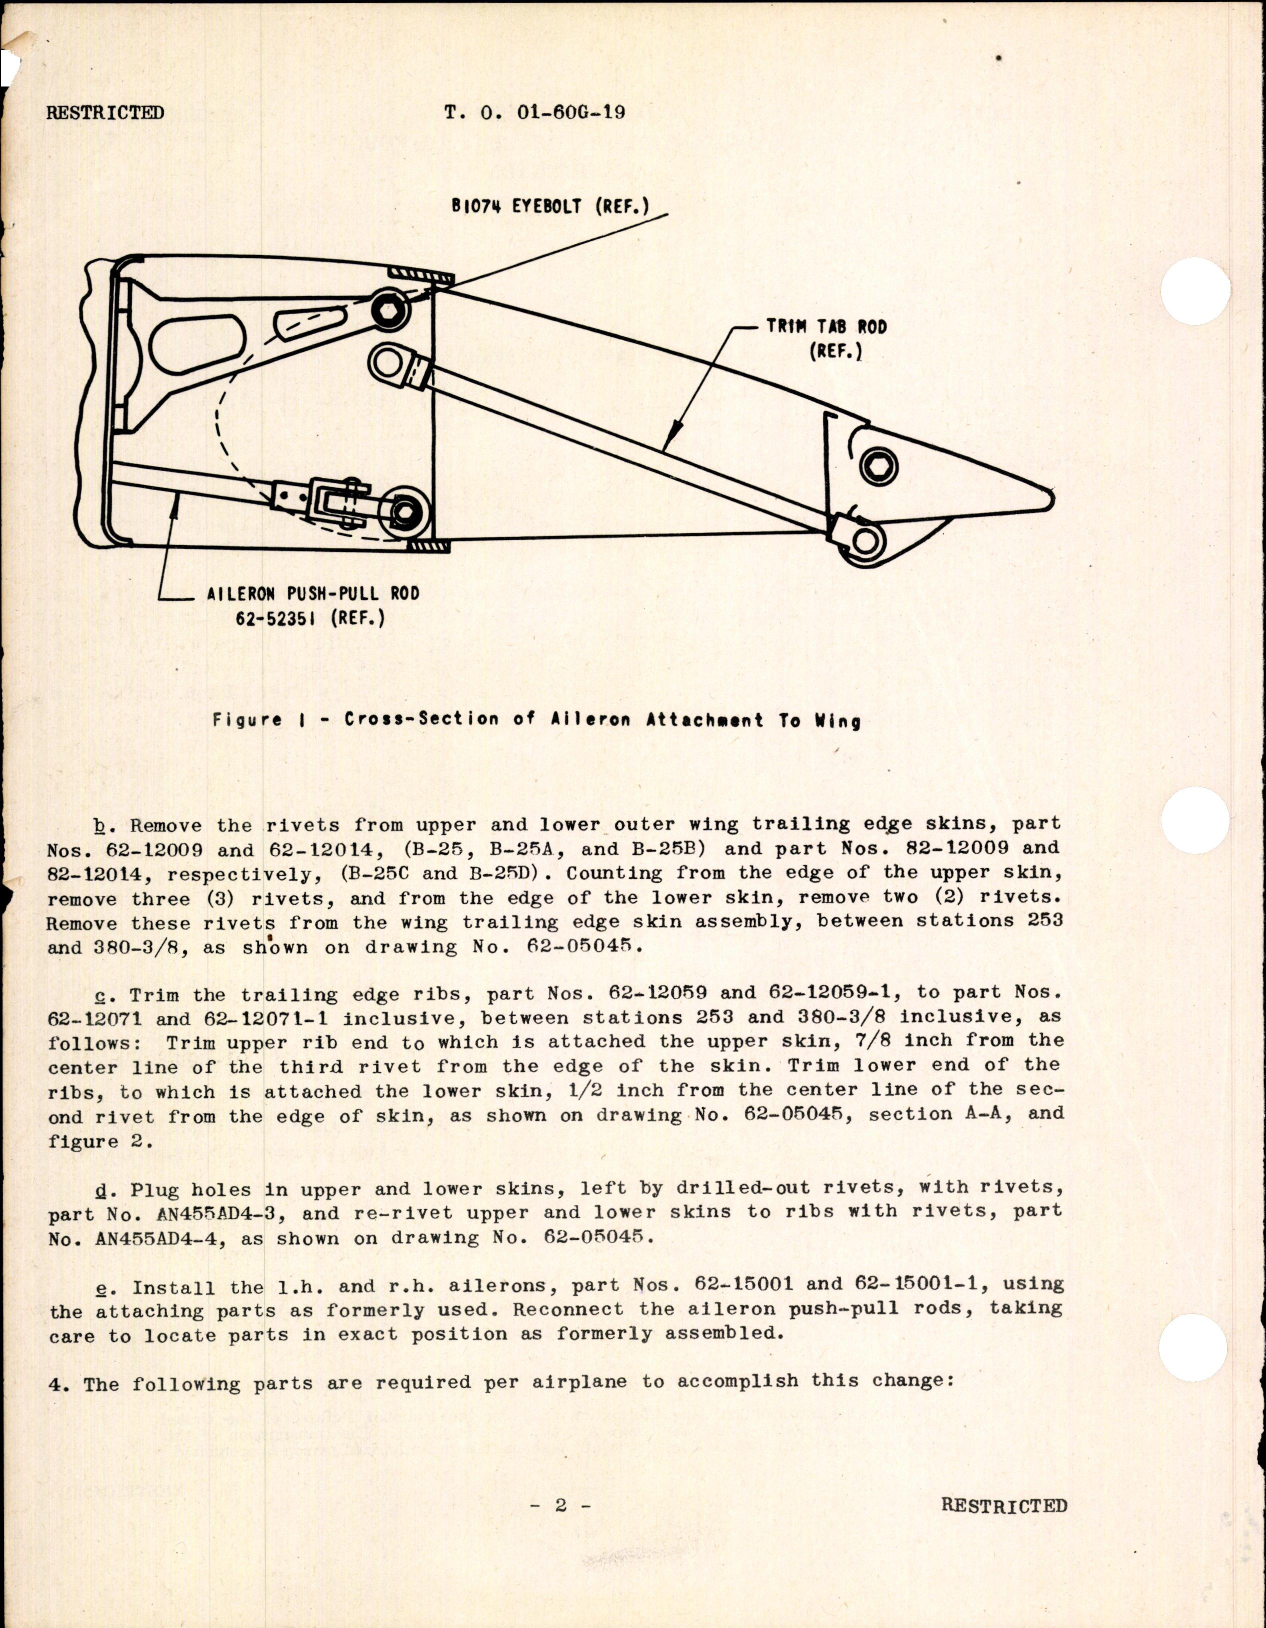 Sample page 2 from AirCorps Library document: Rework of Ribs on Outer Wing Trailing Edge